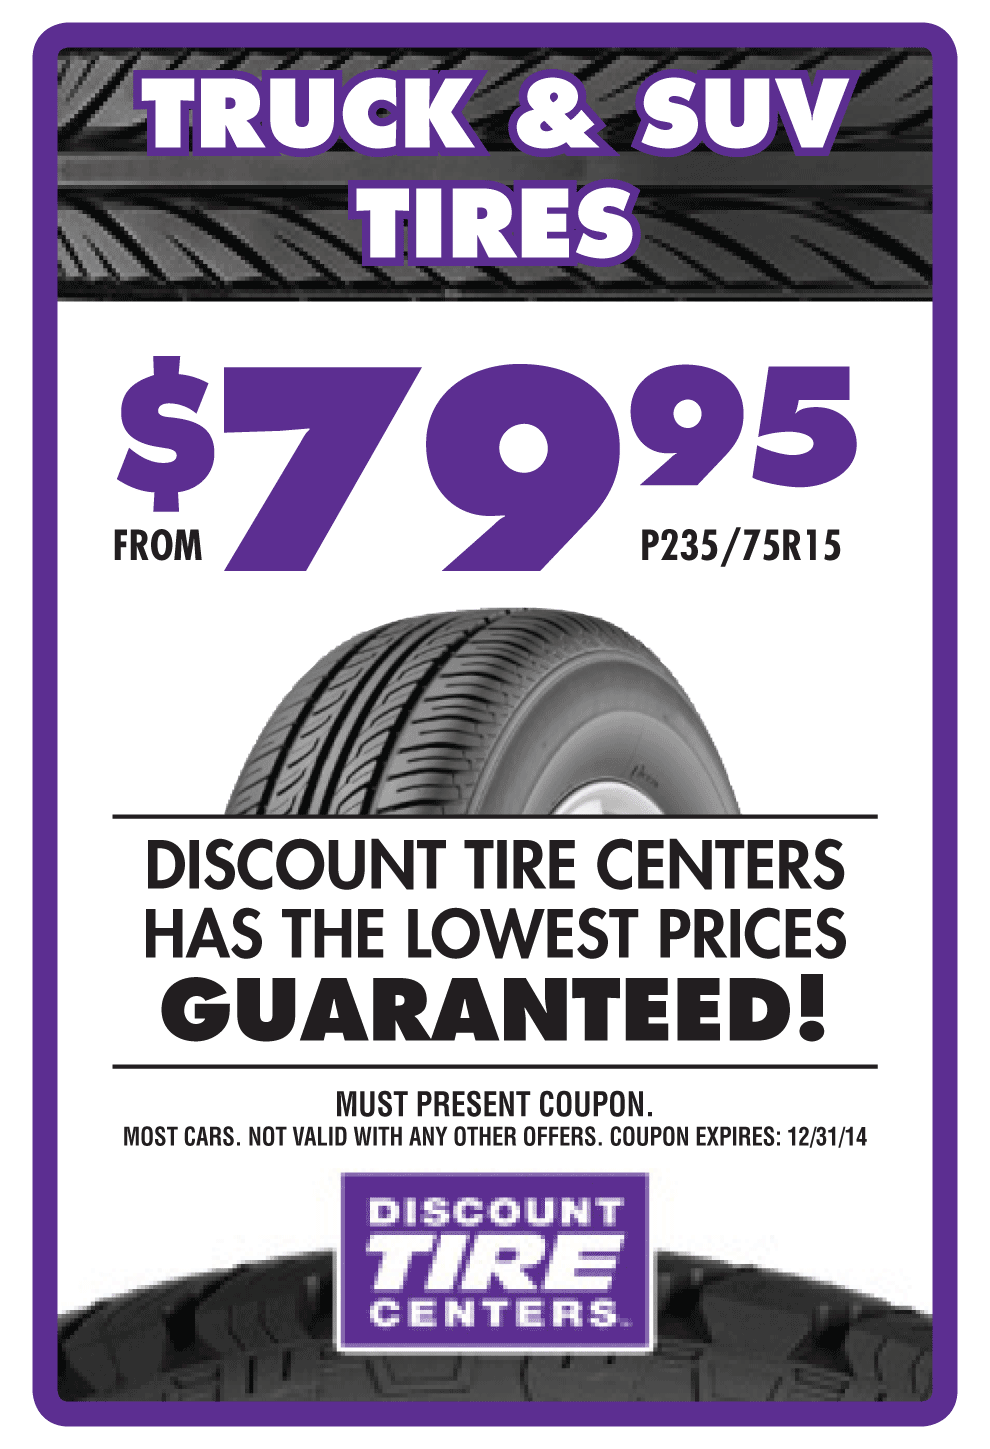 Truck / SUV tires from $79.95 (P235/75R15) Discount Tire Centers has the Lowest Prices Guaranteed! Coupon expires 12/31/14.<br>
<a 
	class="btn-purple"
        style="font-weight:bold;"
	href="https://www.discounttirecenters.com/appointment.php" 
	target="_blank" 
	title="Make Appointment"
>MAKE AN APPOINTMENT
</a>